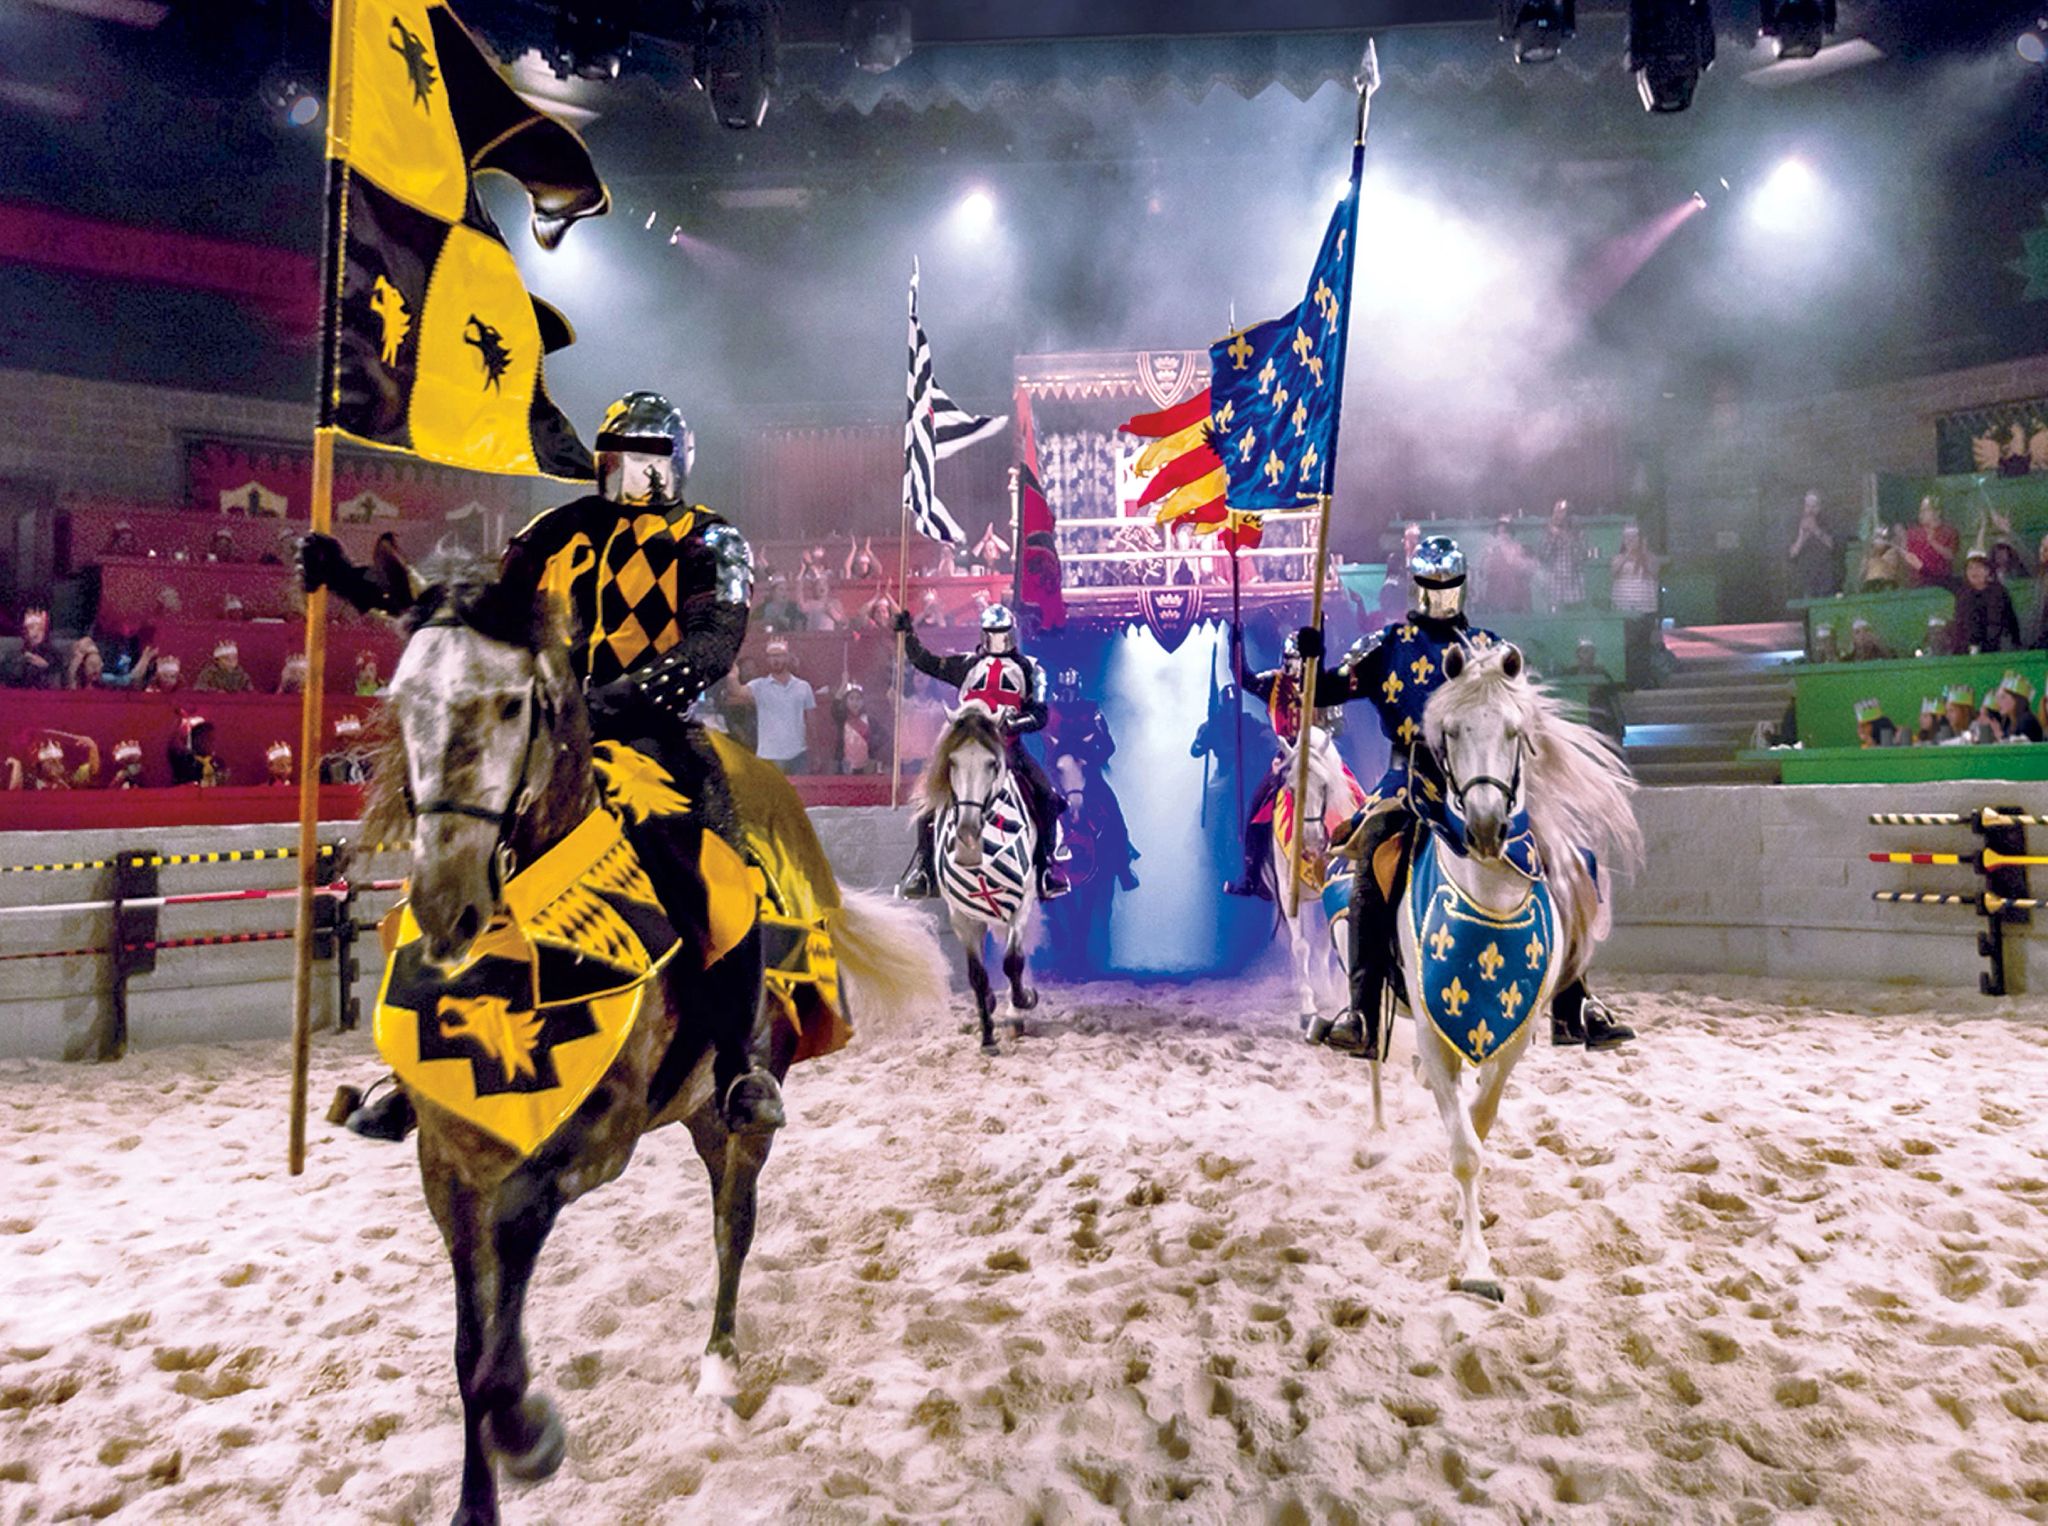 Experience Medieval Times, the Orange County branch of the dinner show